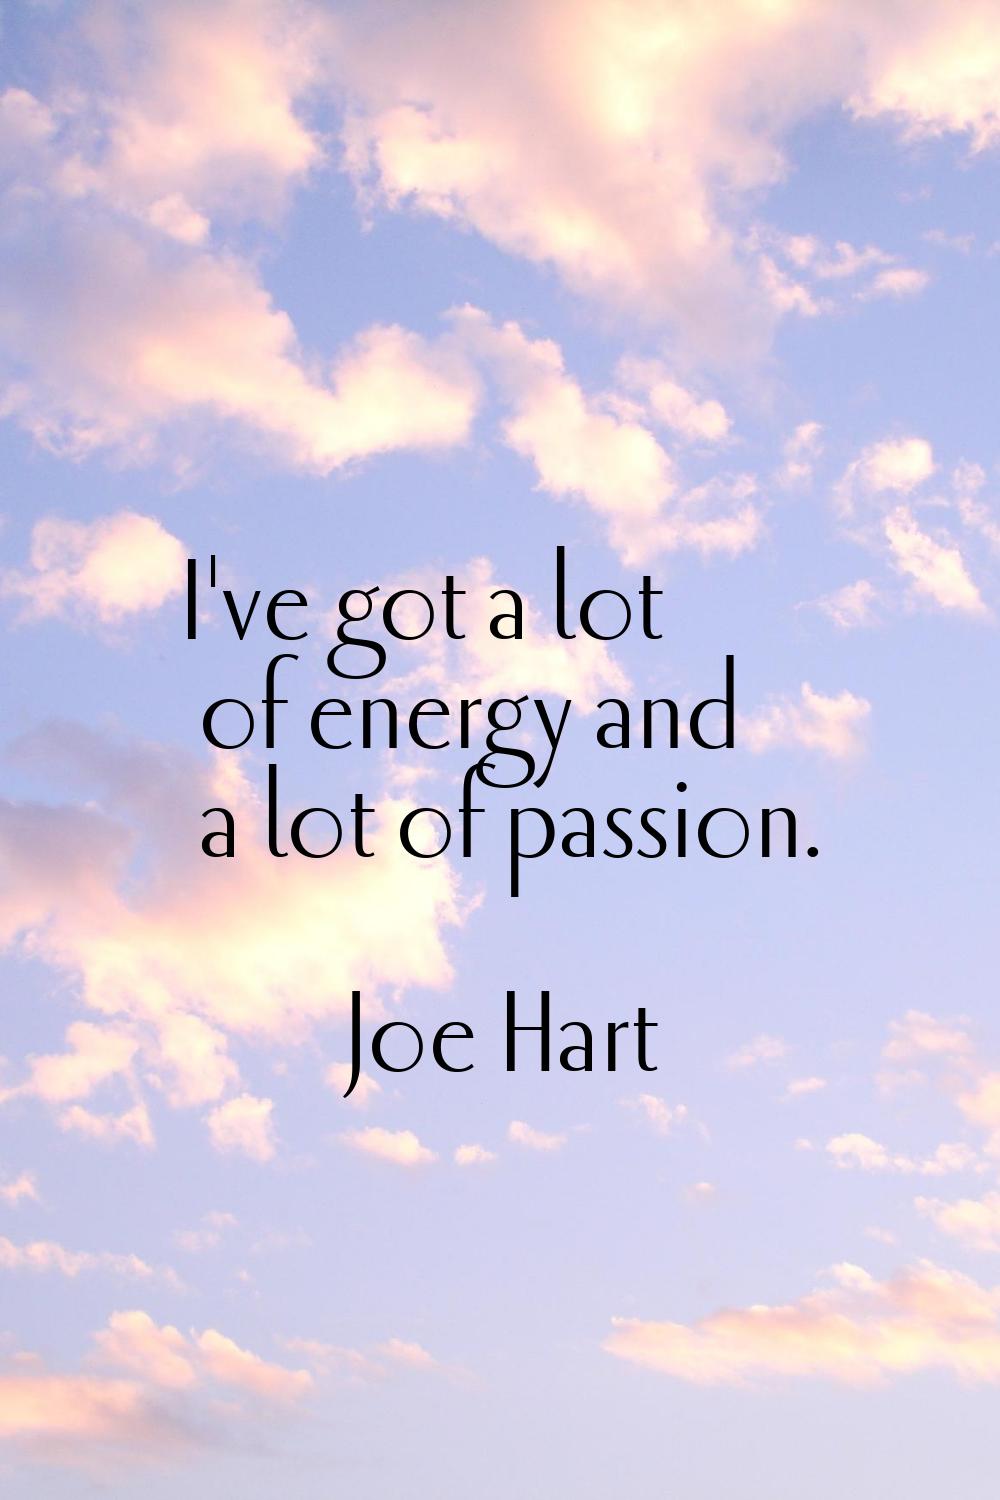 I've got a lot of energy and a lot of passion.